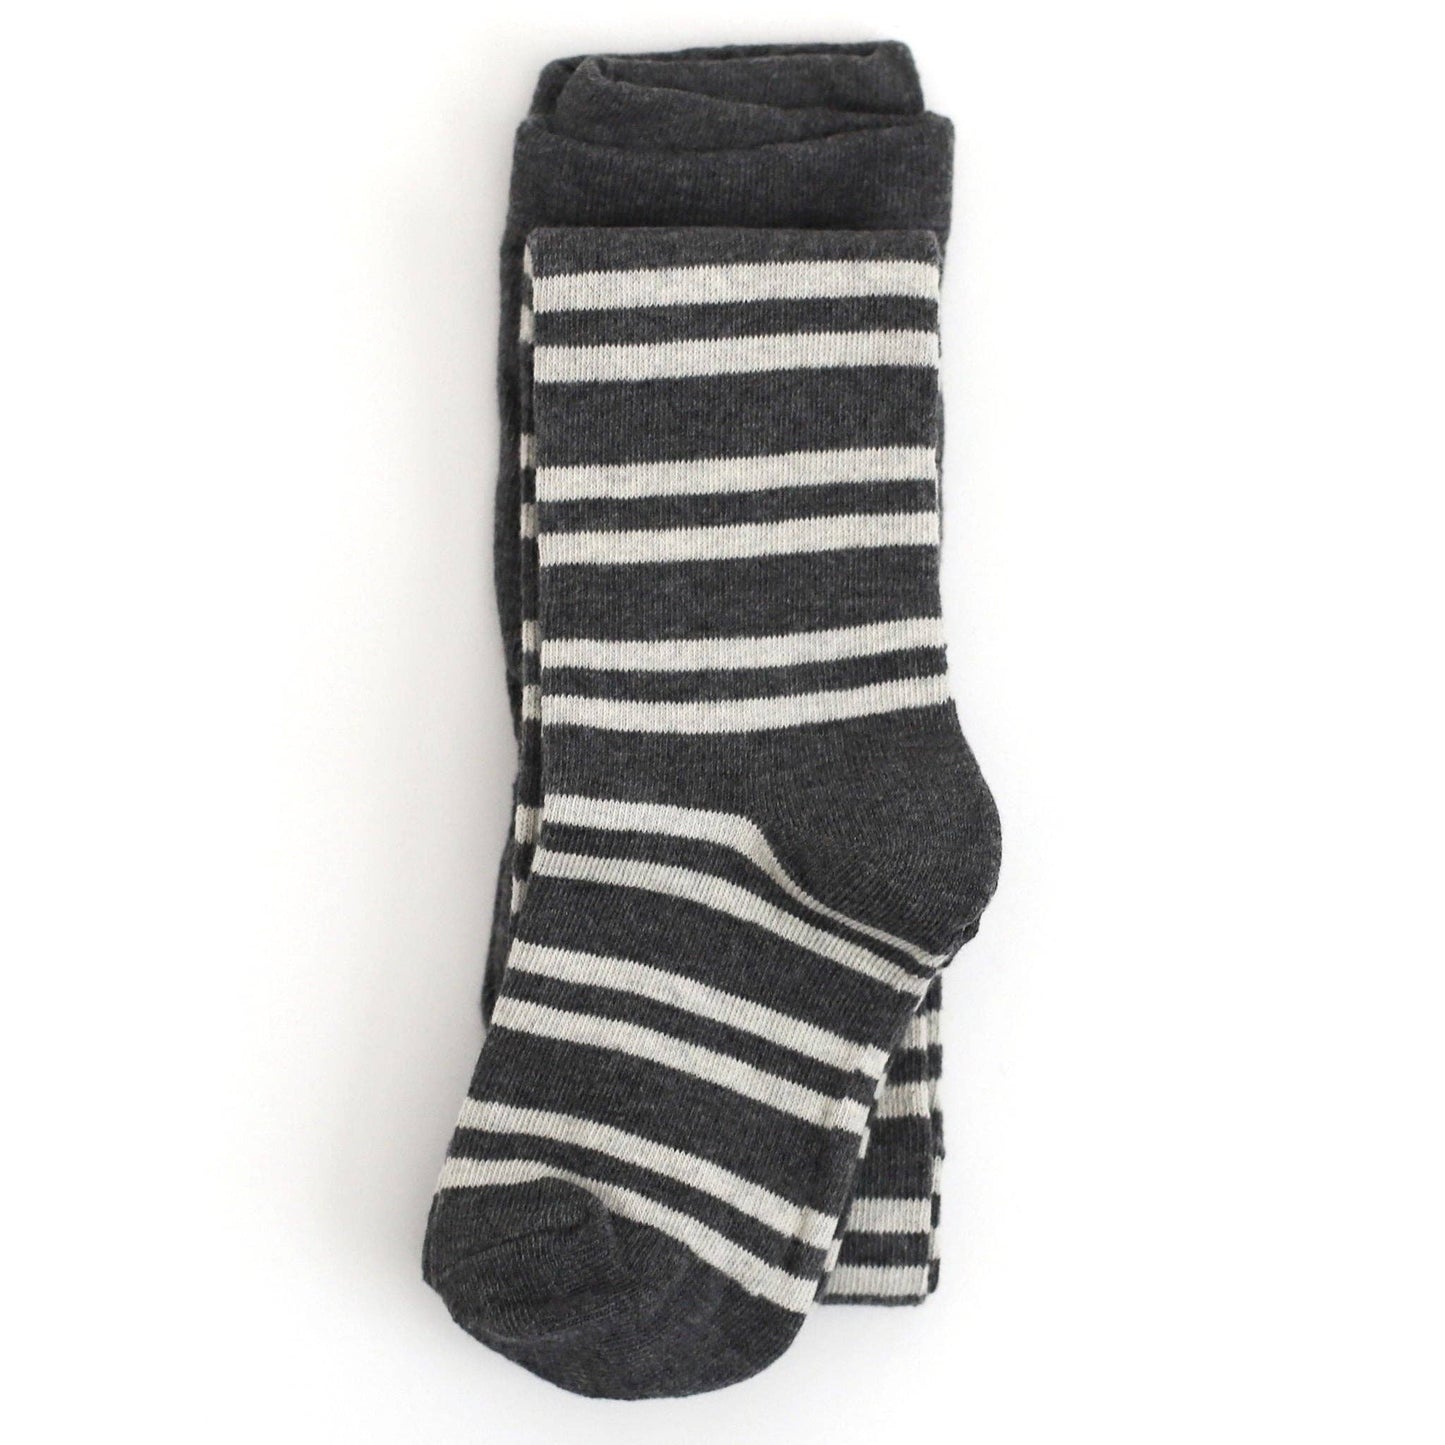 Little Stocking Co. - Charcoal Striped Knit Tights: 3-4 YEARS